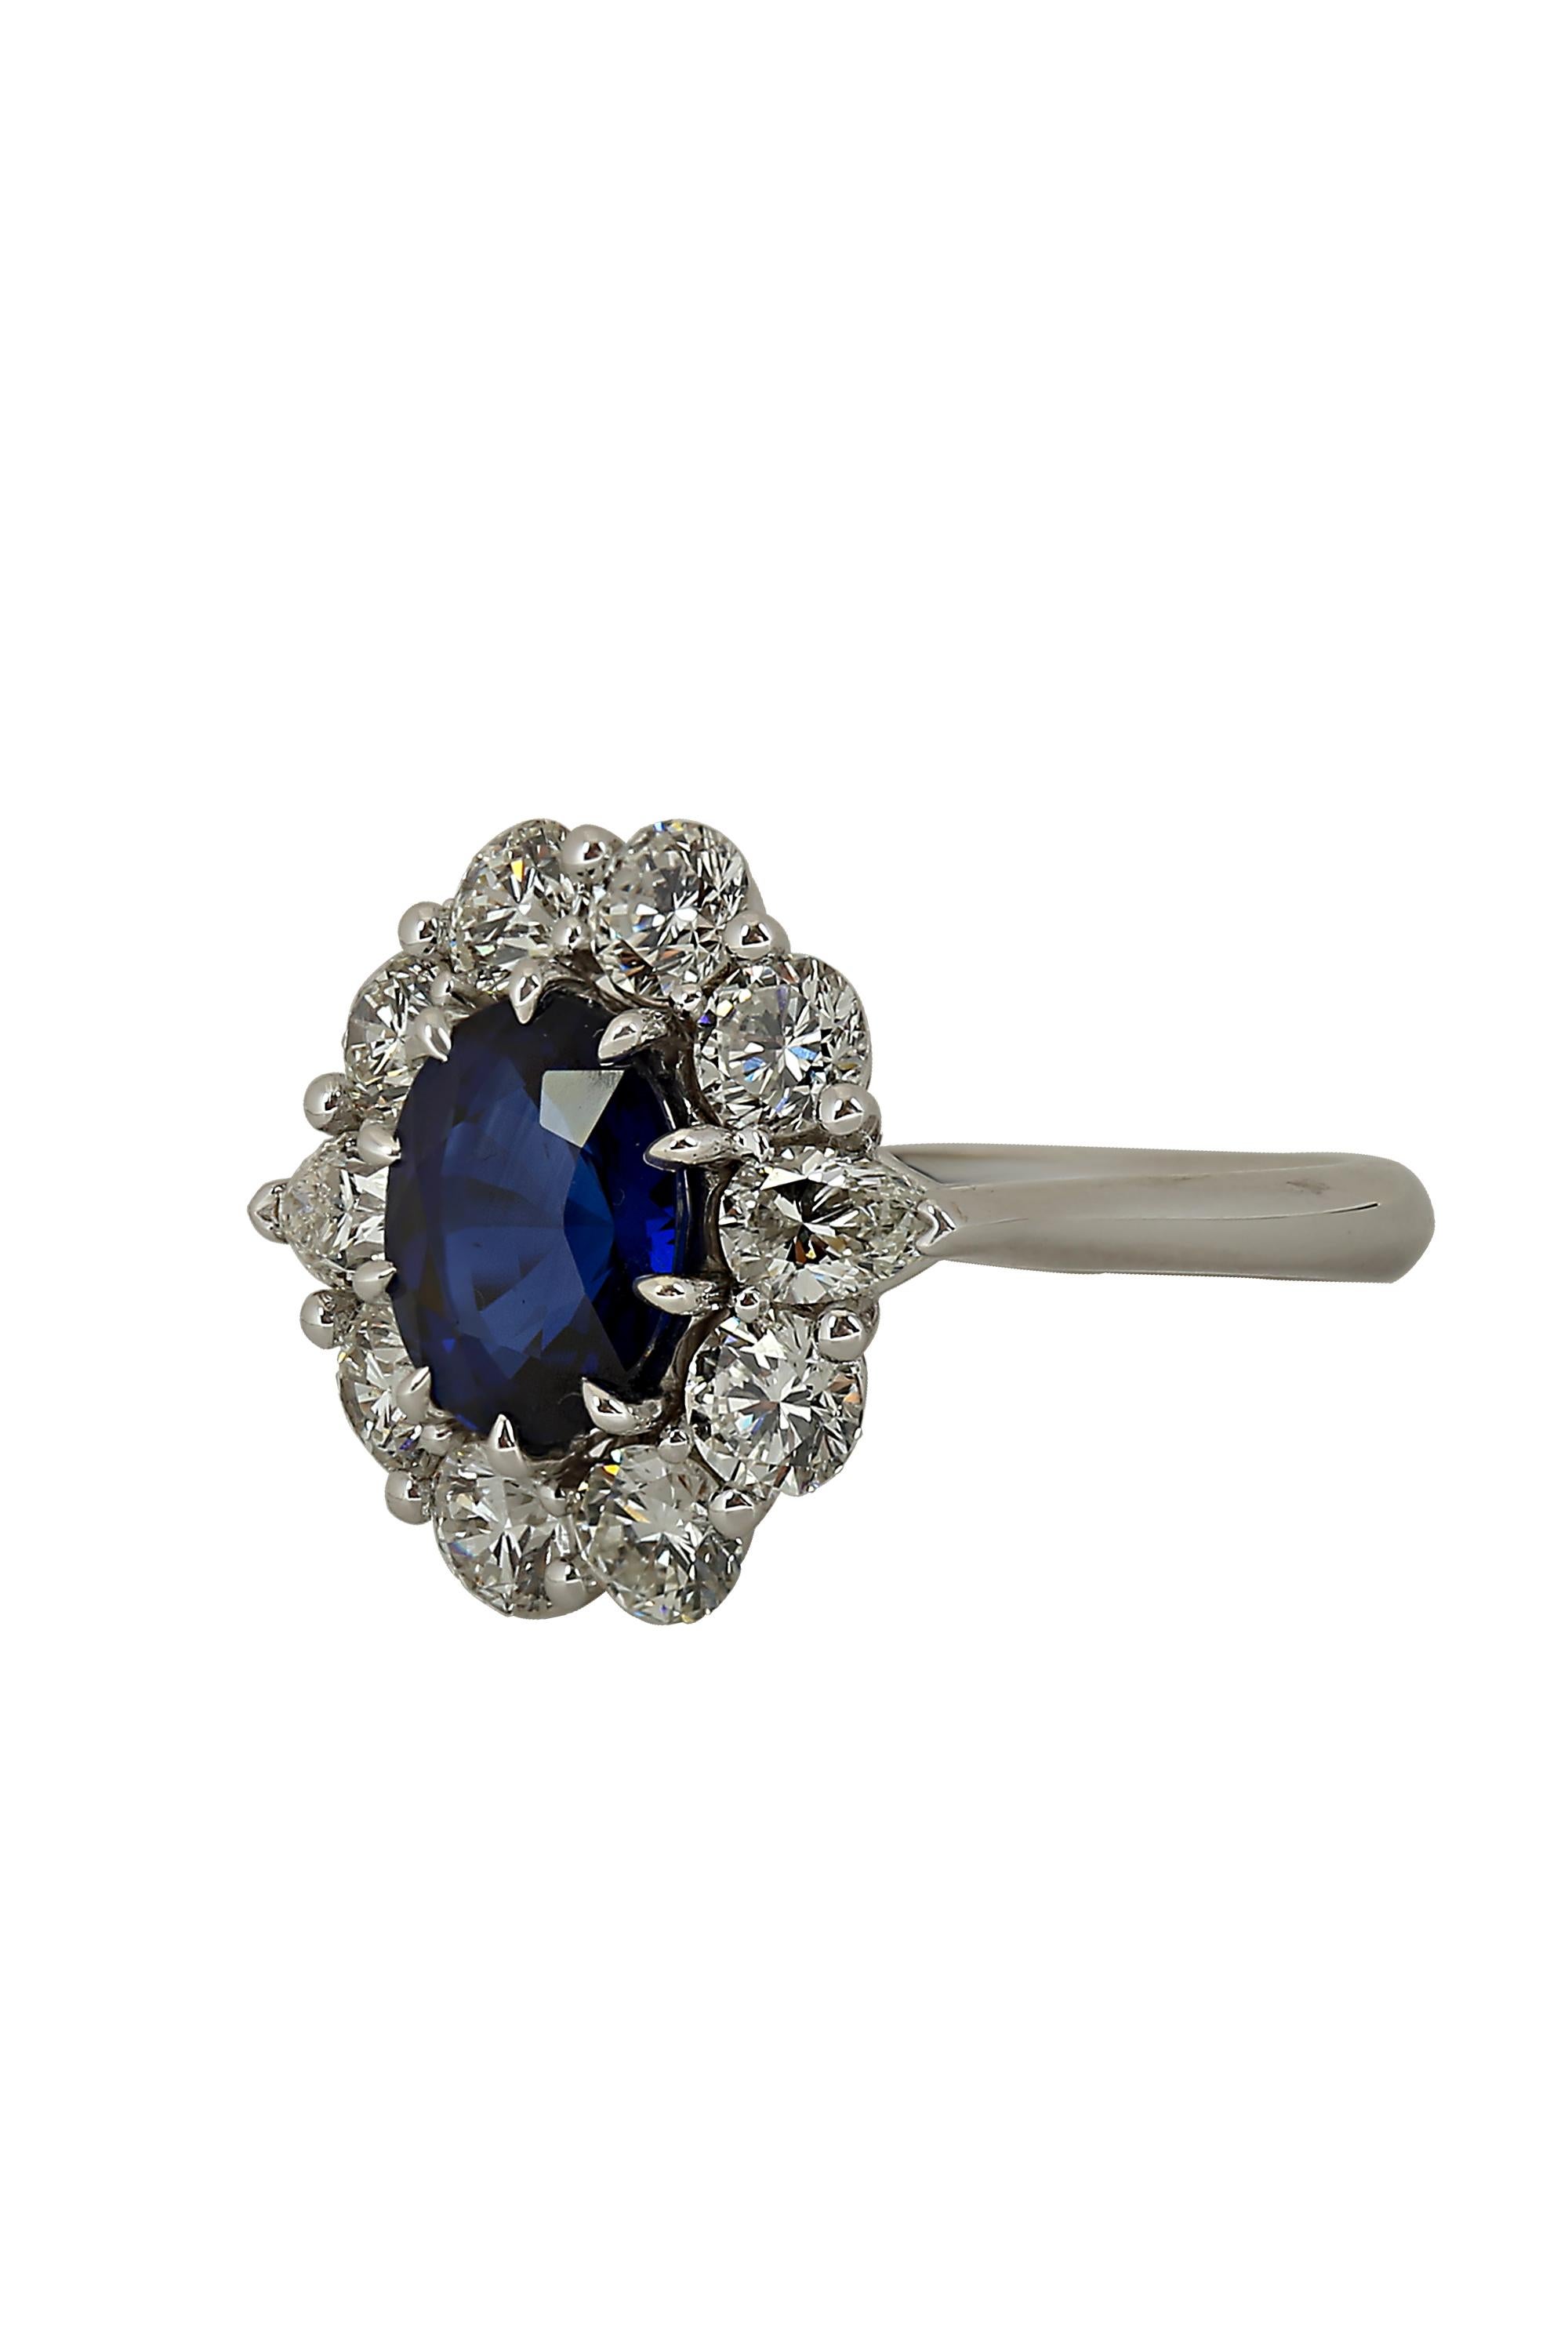 Designed and created by Gems Are Forever, Inc. Beverly Hills, this elegant and striking ring features a rich royal blue oval sapphire weighing 2.73 carats, beautifully set off by bright round brilliant diamonds enhanced by two pear shaped diamonds.